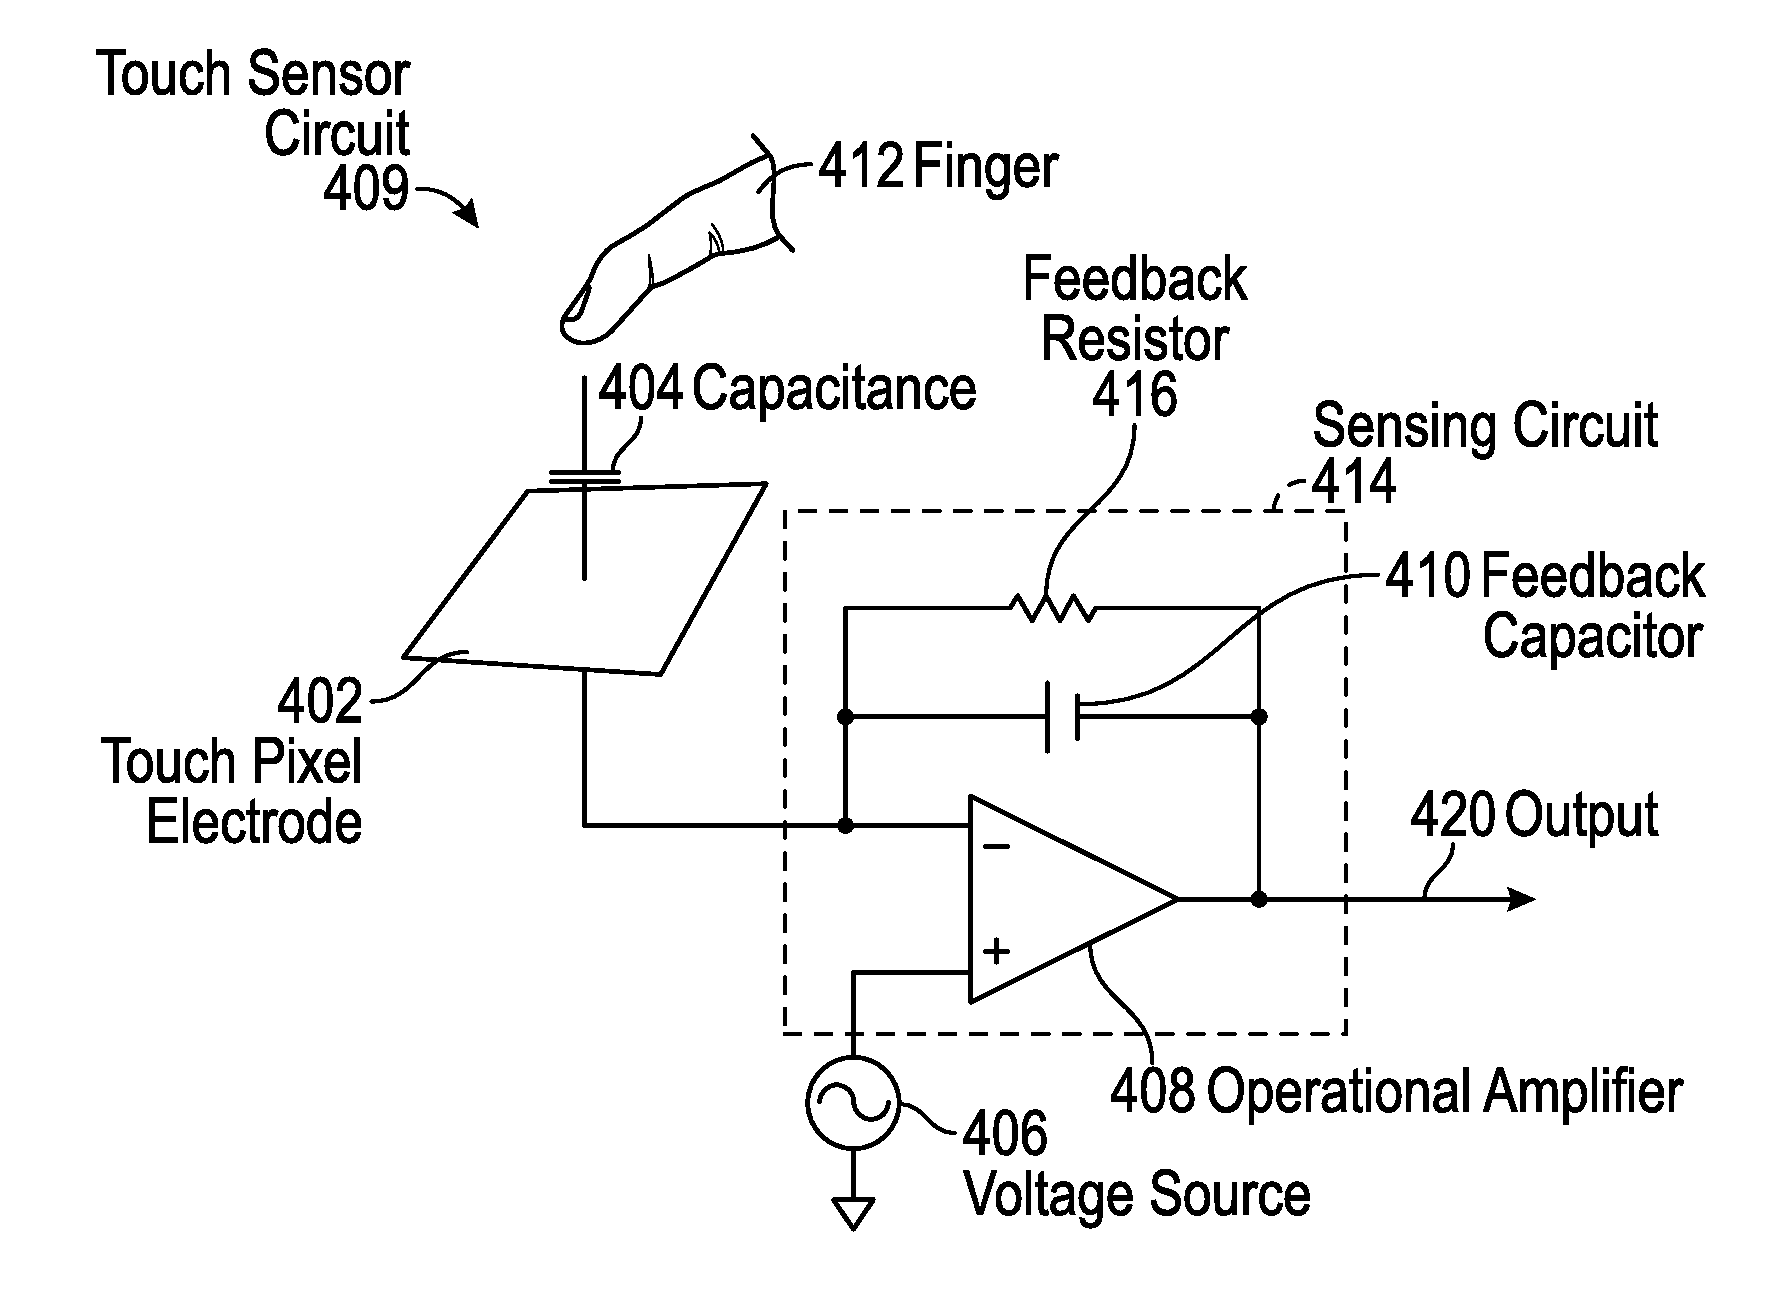 Adjustment of touch sensing stimulation voltage levels based on touch performance